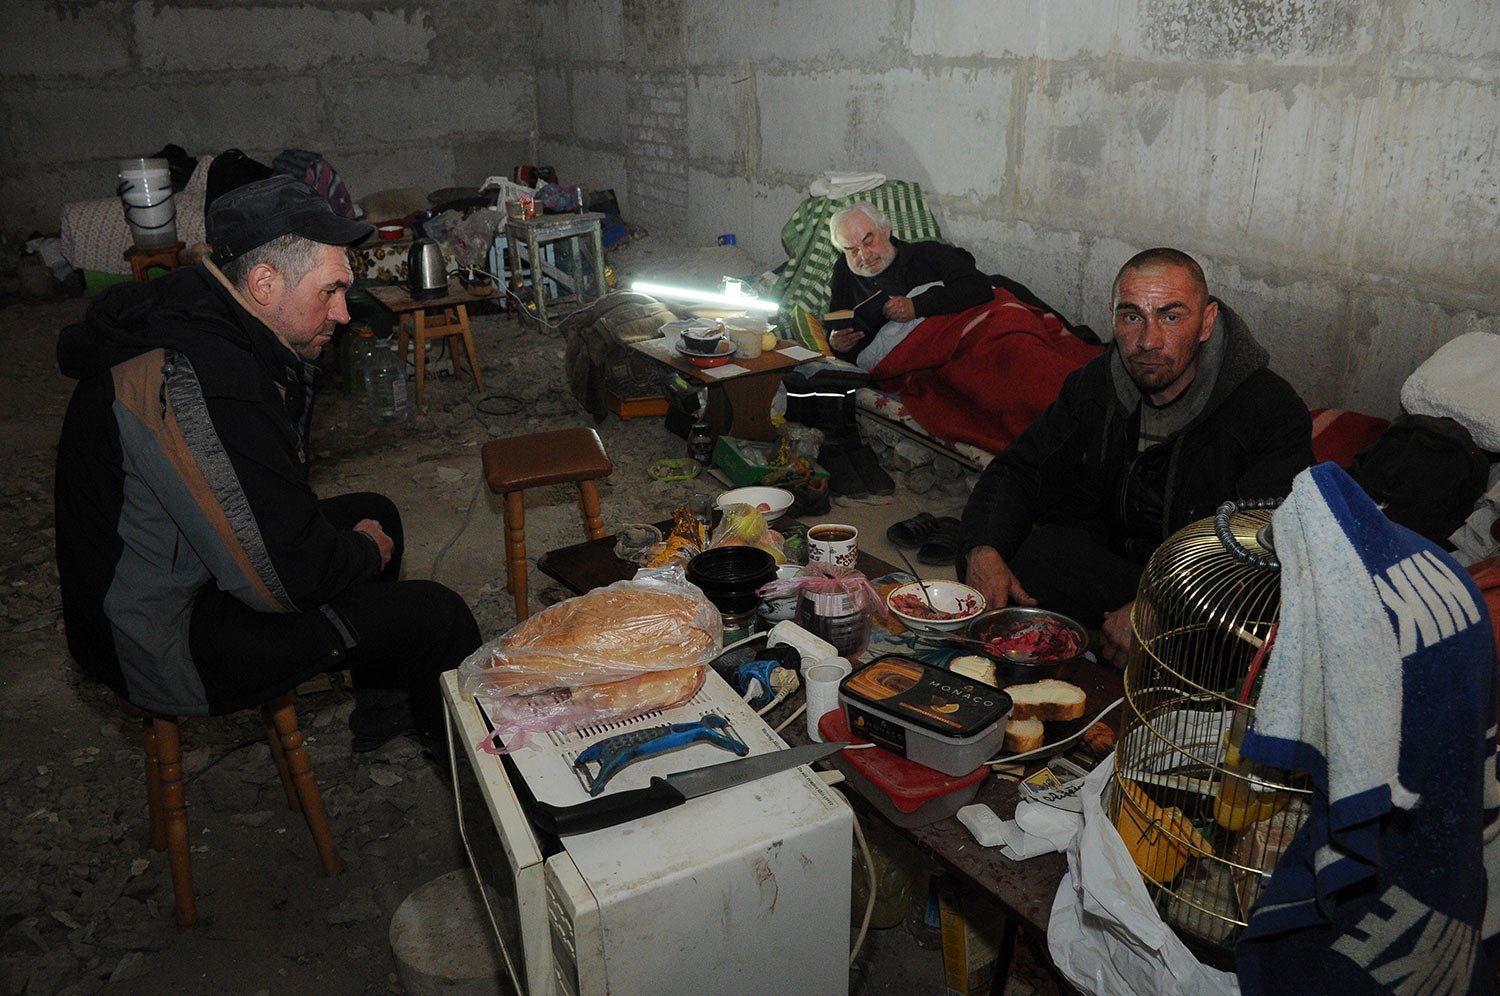  People settle in a basement of an apartment building in Kharkiv, Ukraine, Sunday, April 10, 2022. (AP Photo/Andrew Marienko) 